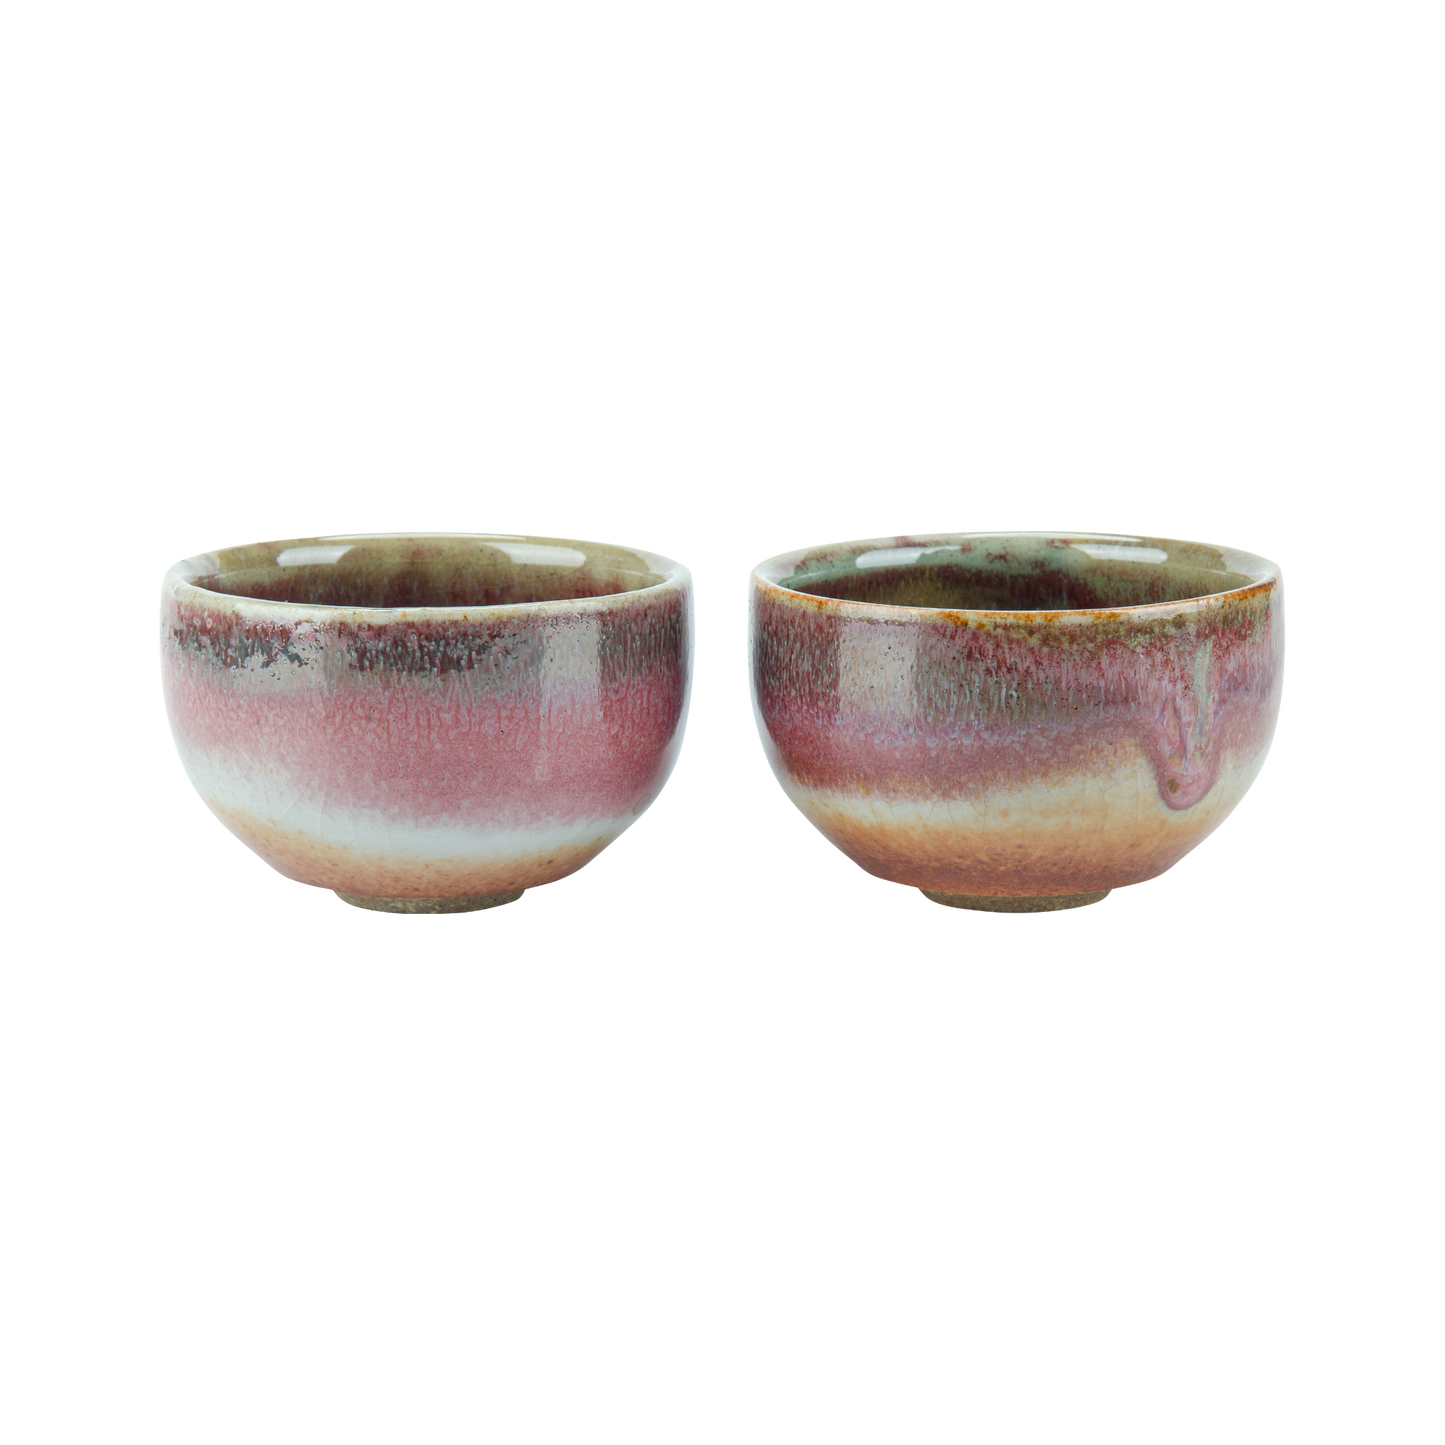 Taiwanese Miaoli Clay Tea Cups - Kisses from the Earth